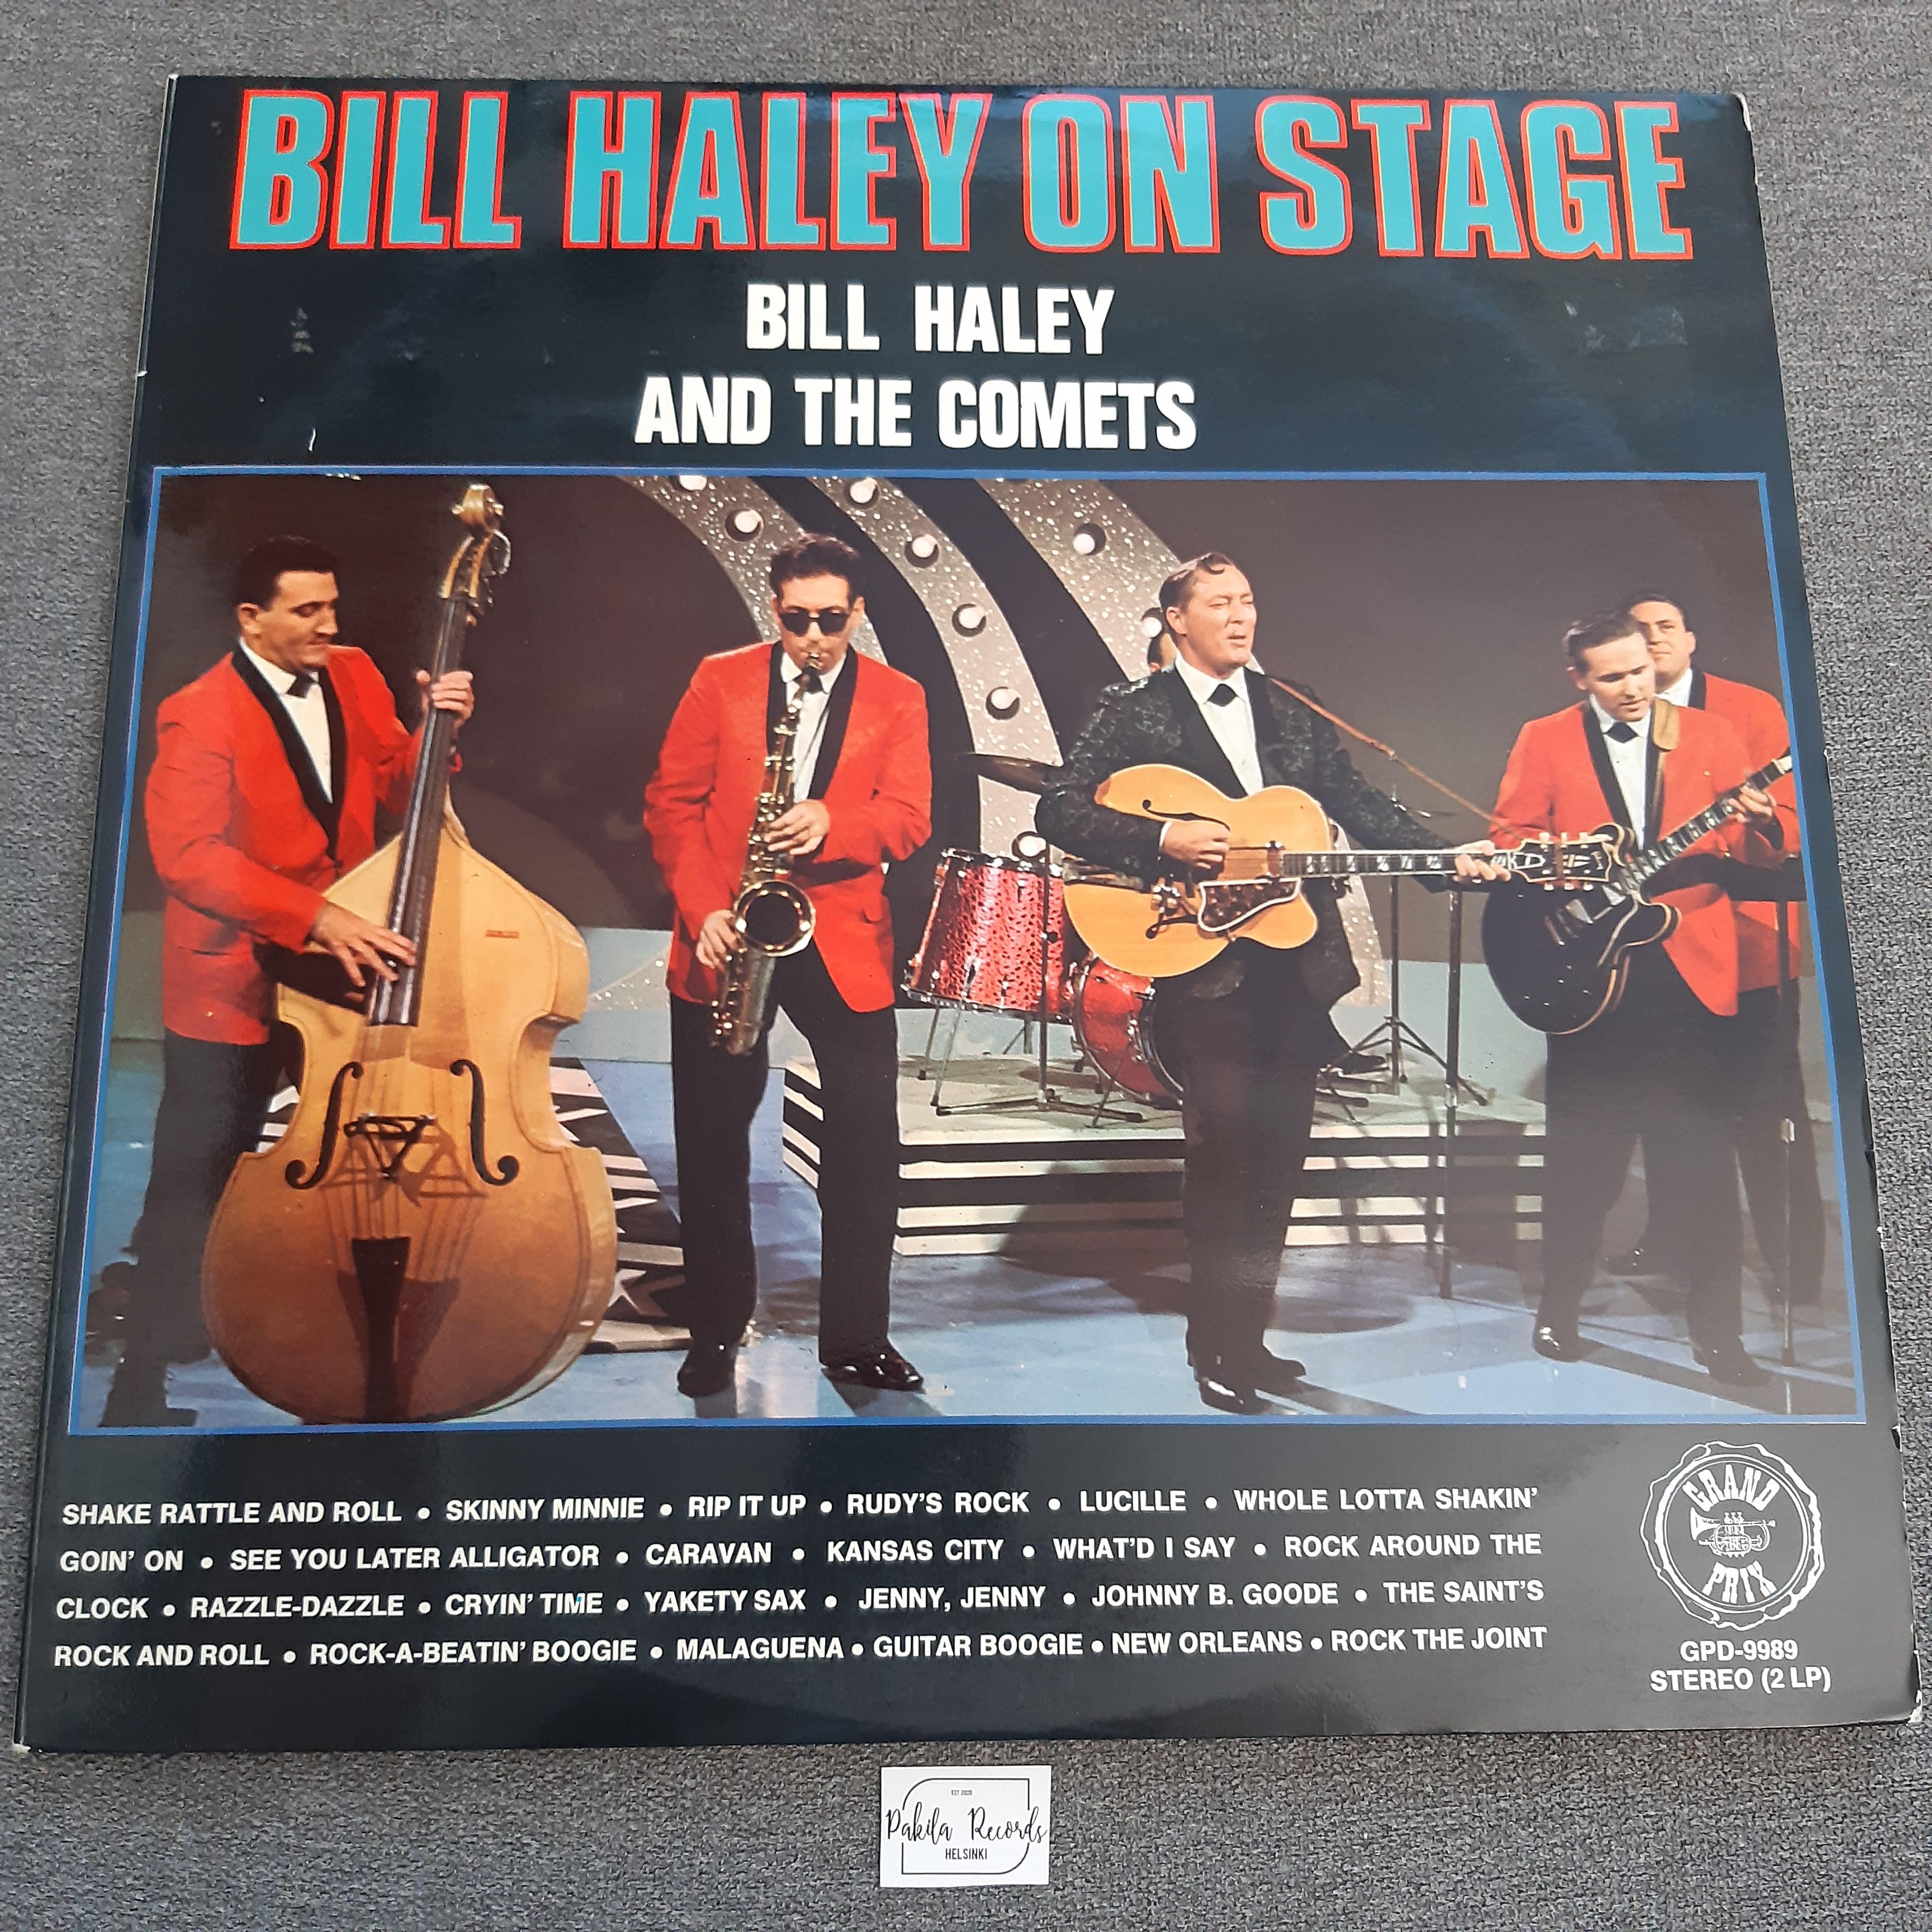 Bill Haley And The Comets - Bill Haley On Stage - 2 (käytetty)